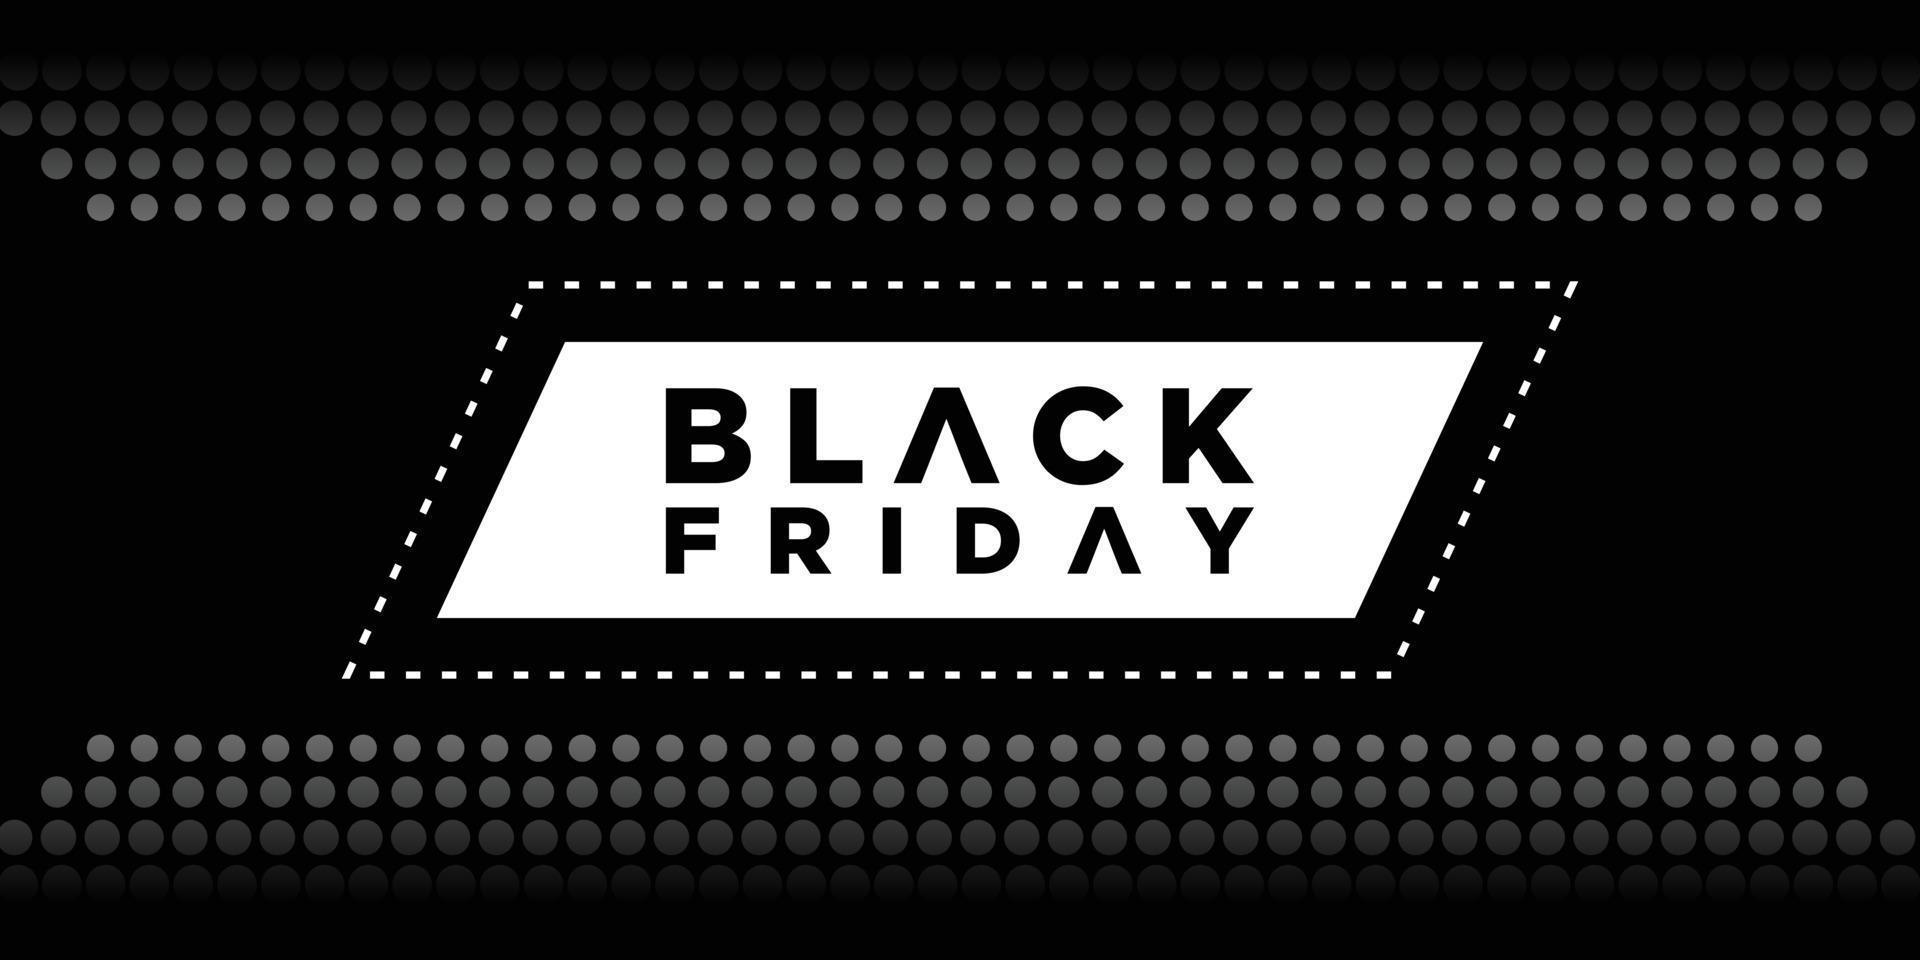 flat black friday background design with white halftones vector